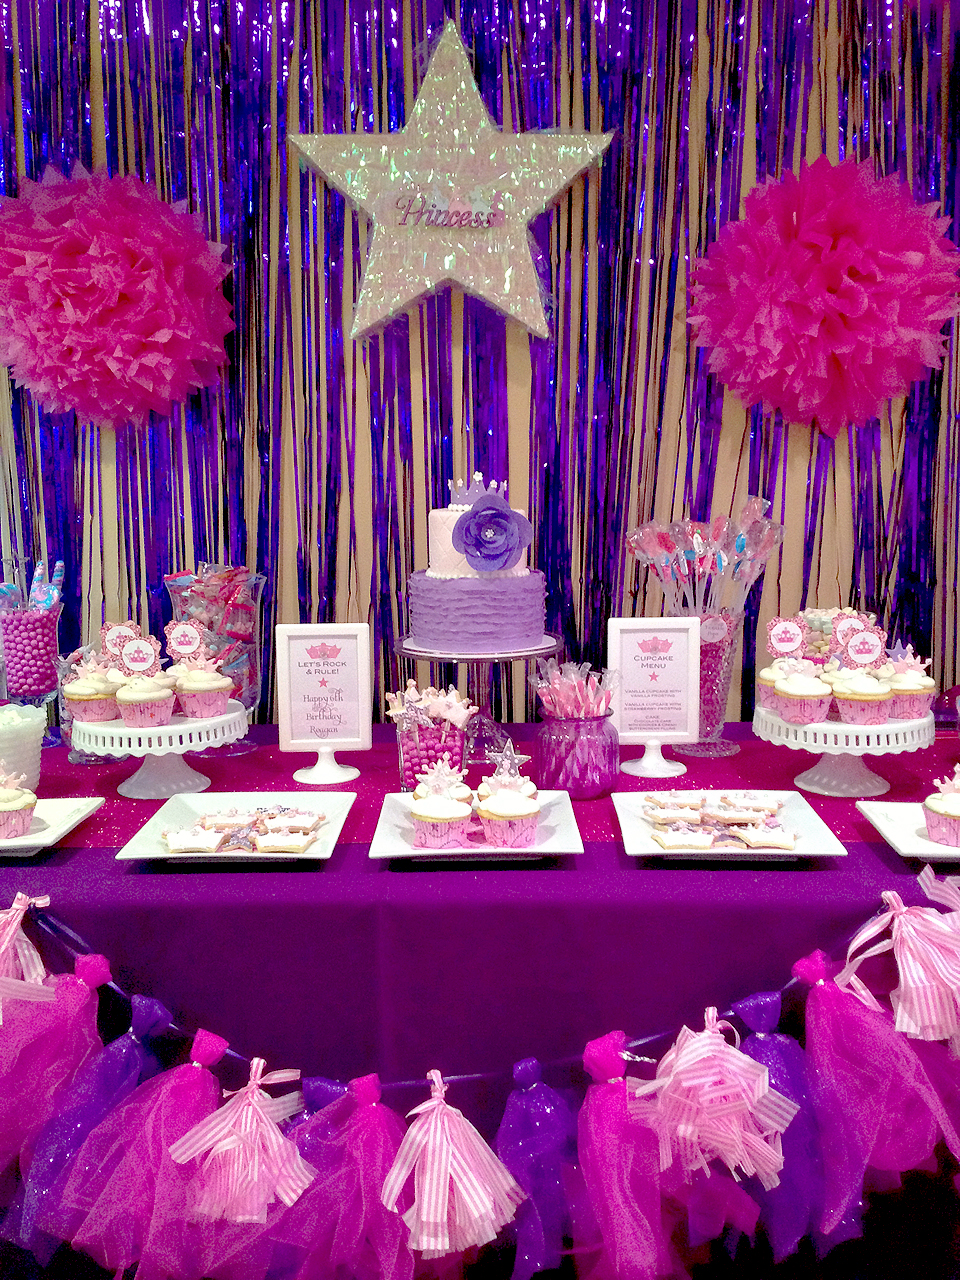 The Couture Cakery - Reagan's 6th Birthday